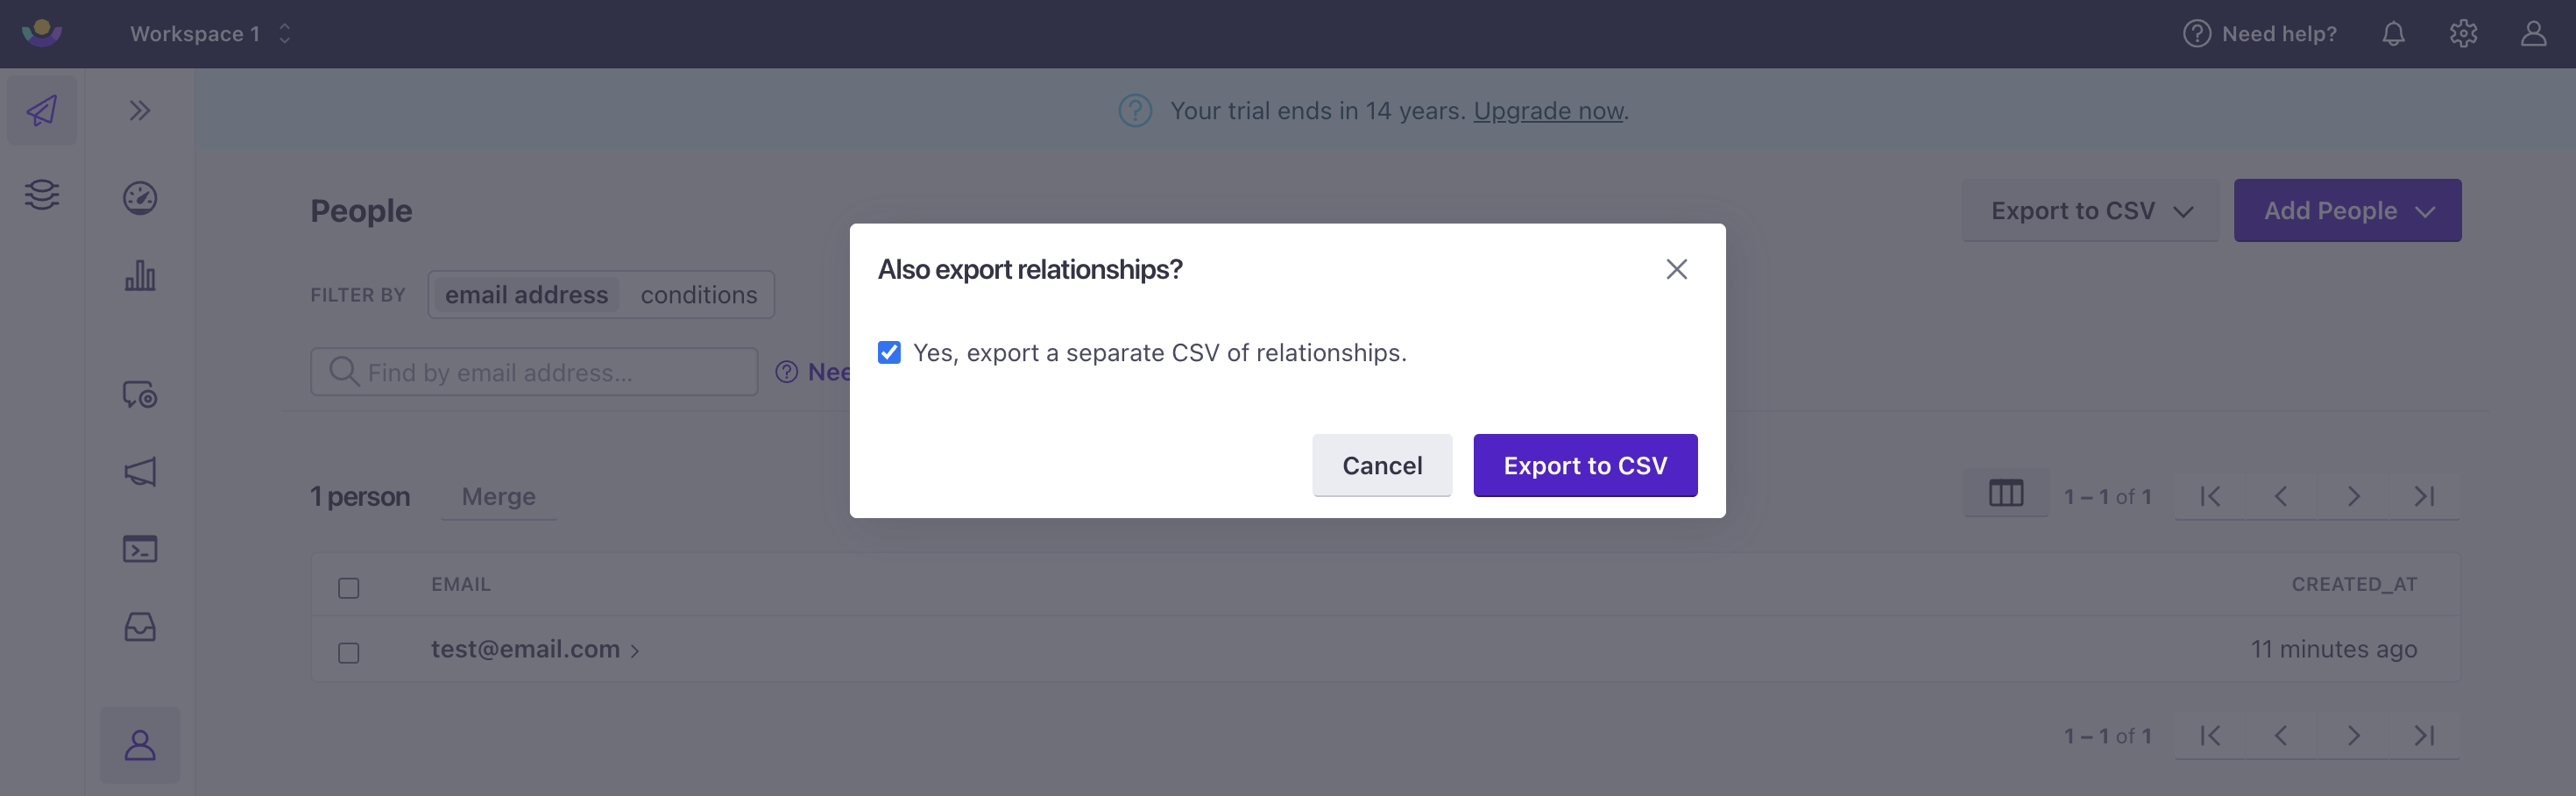 The box, labeled Yes, export a separate CSV of relationships, is checked.